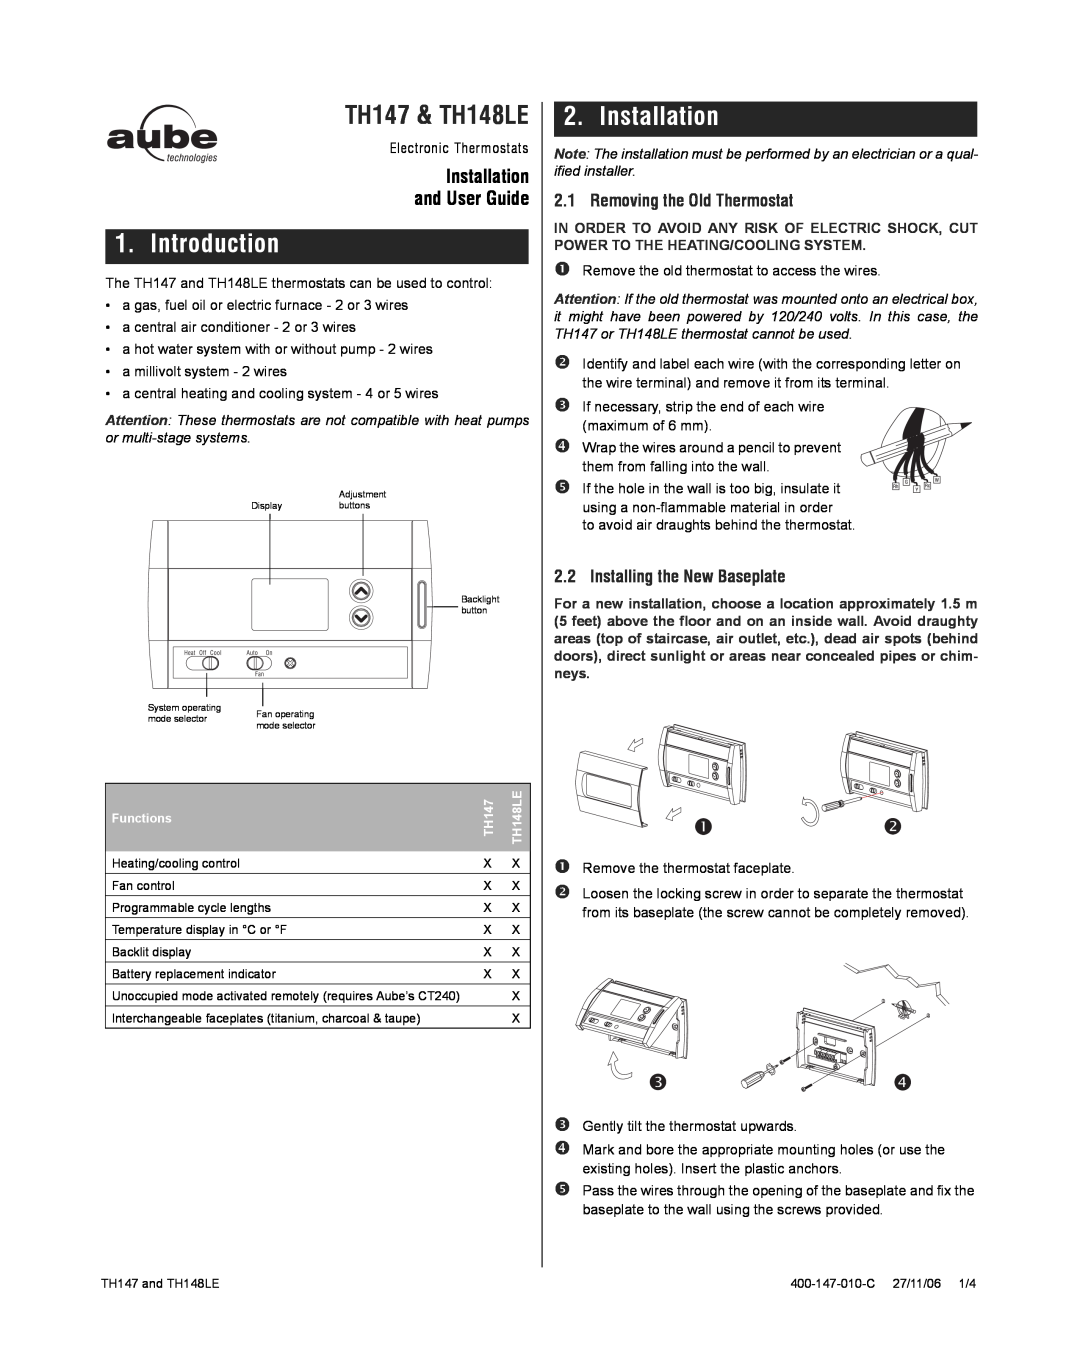 Aube Technologies TH148LE manual Introduction, Installation, Removing the Old Thermostat, Installing the New Baseplate 